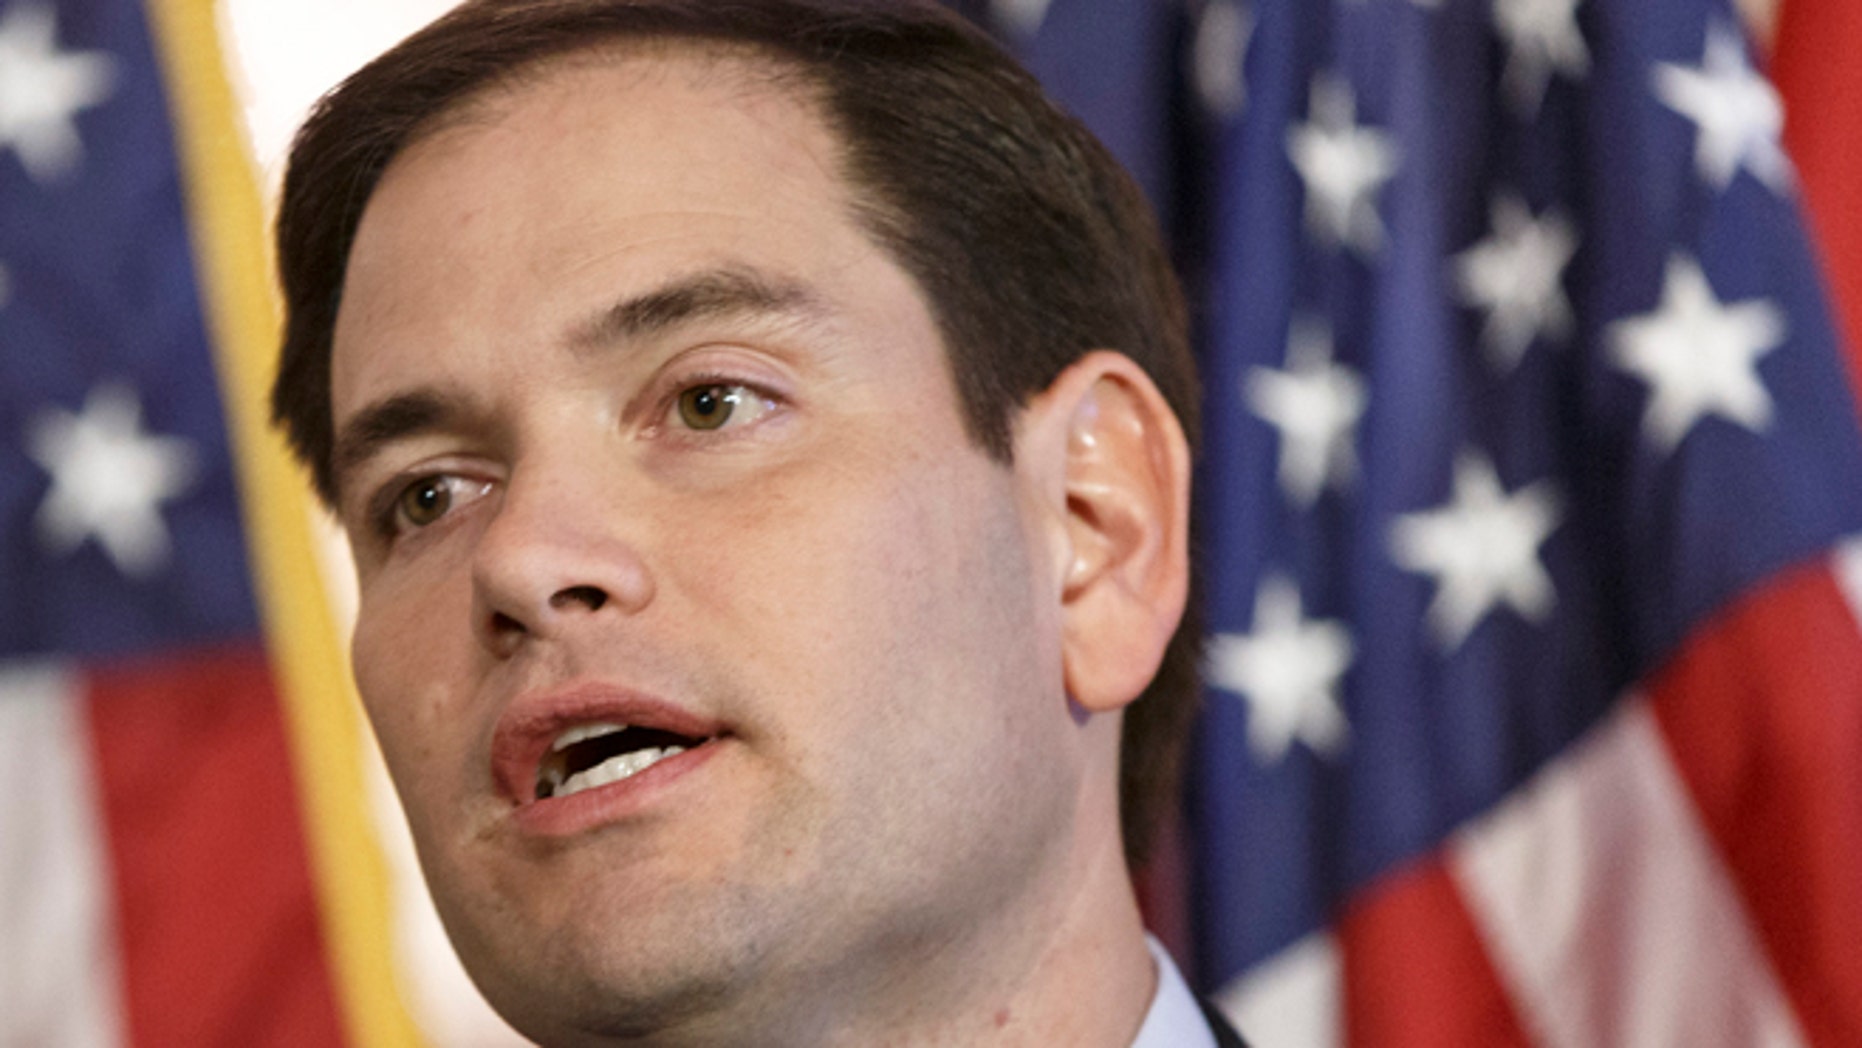 Sen. Marco Rubio: Here’s what Congress should do to help small businesses and entrepreneurs succeed